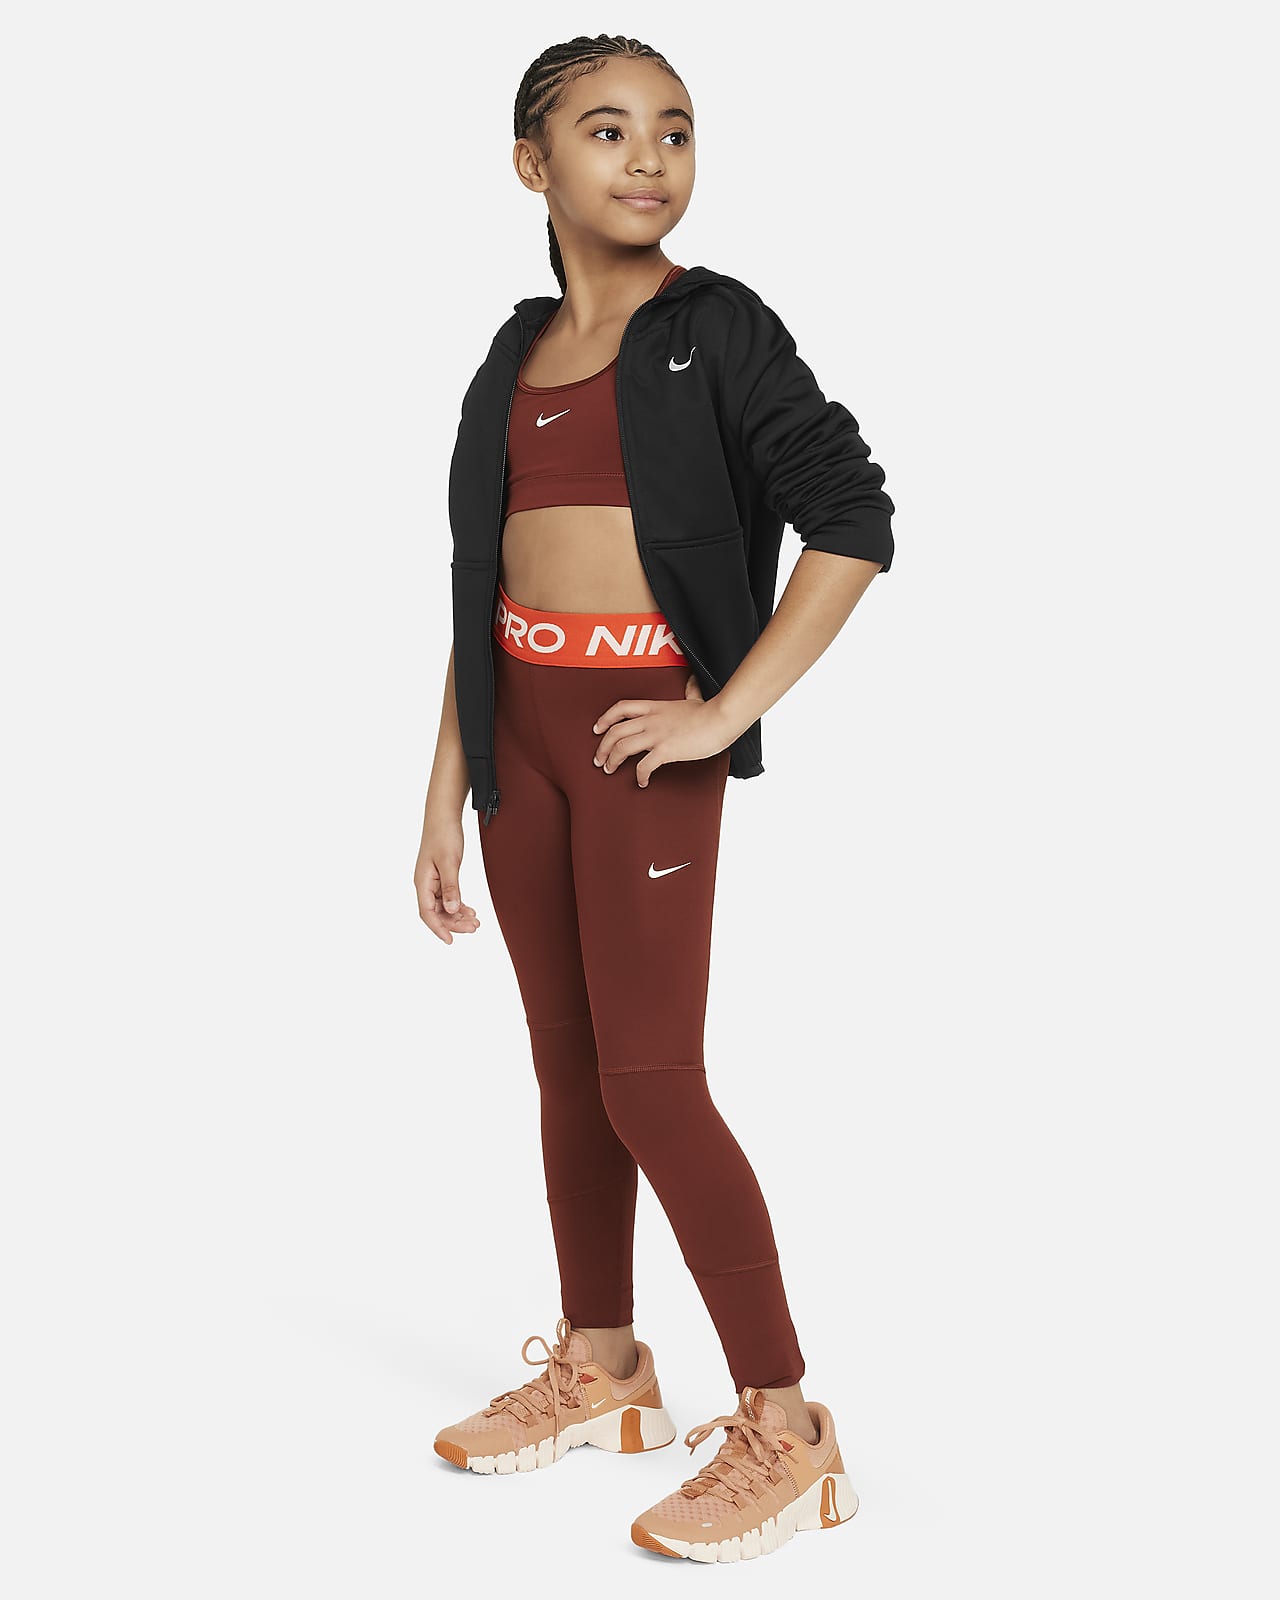 NIKE Girls Dri Fit Leggings 9-10 Years Small Red, Vintage & Second-Hand  Clothing Online